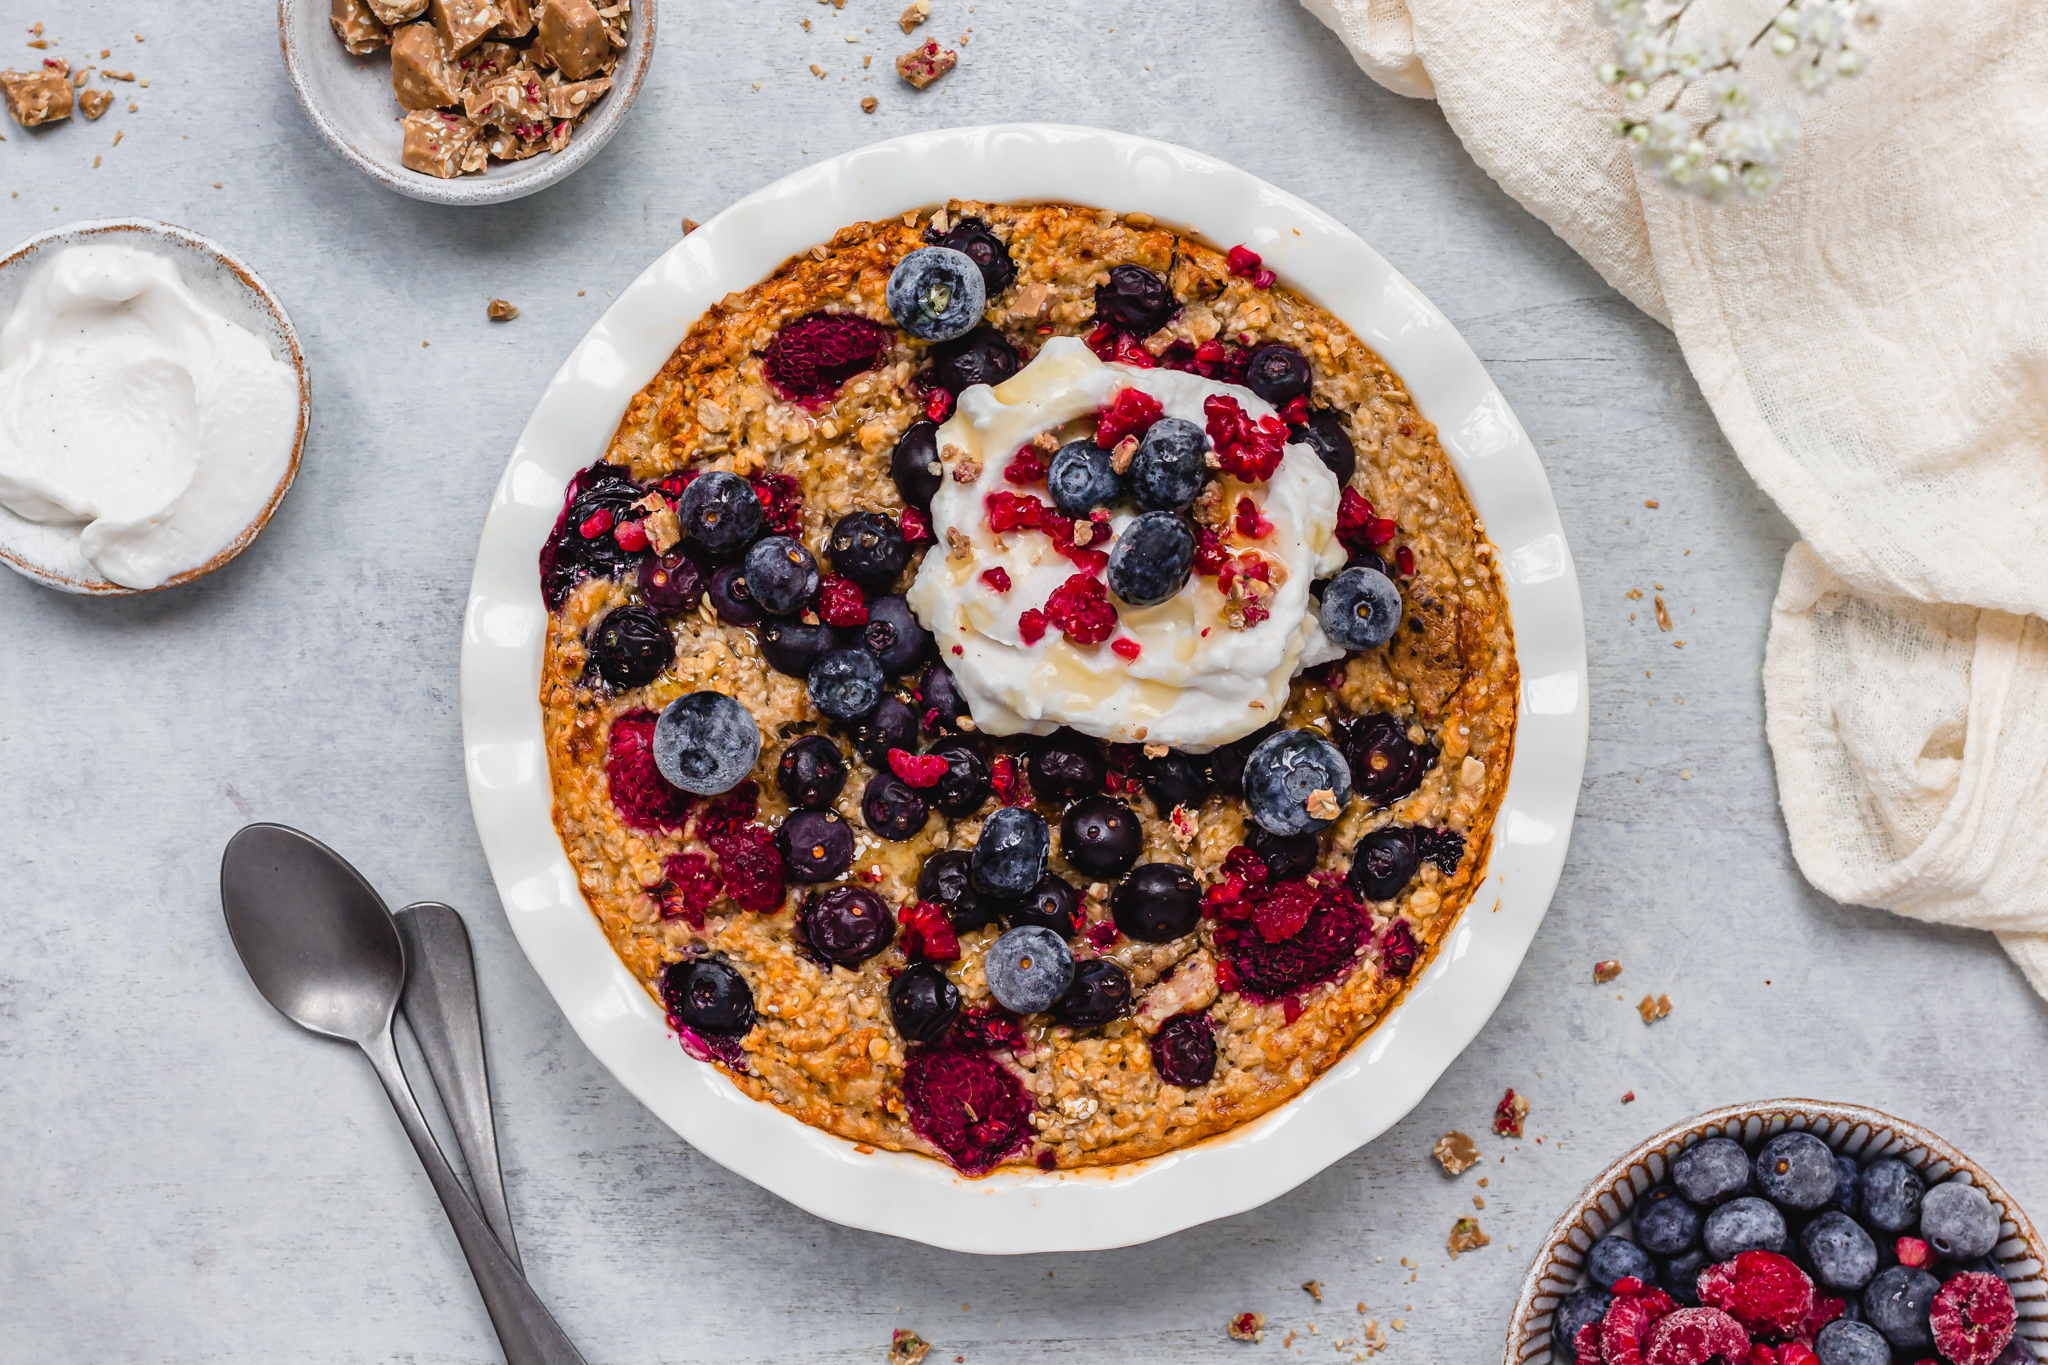 Landscape photo of White Chocolate Berry Baked Oats